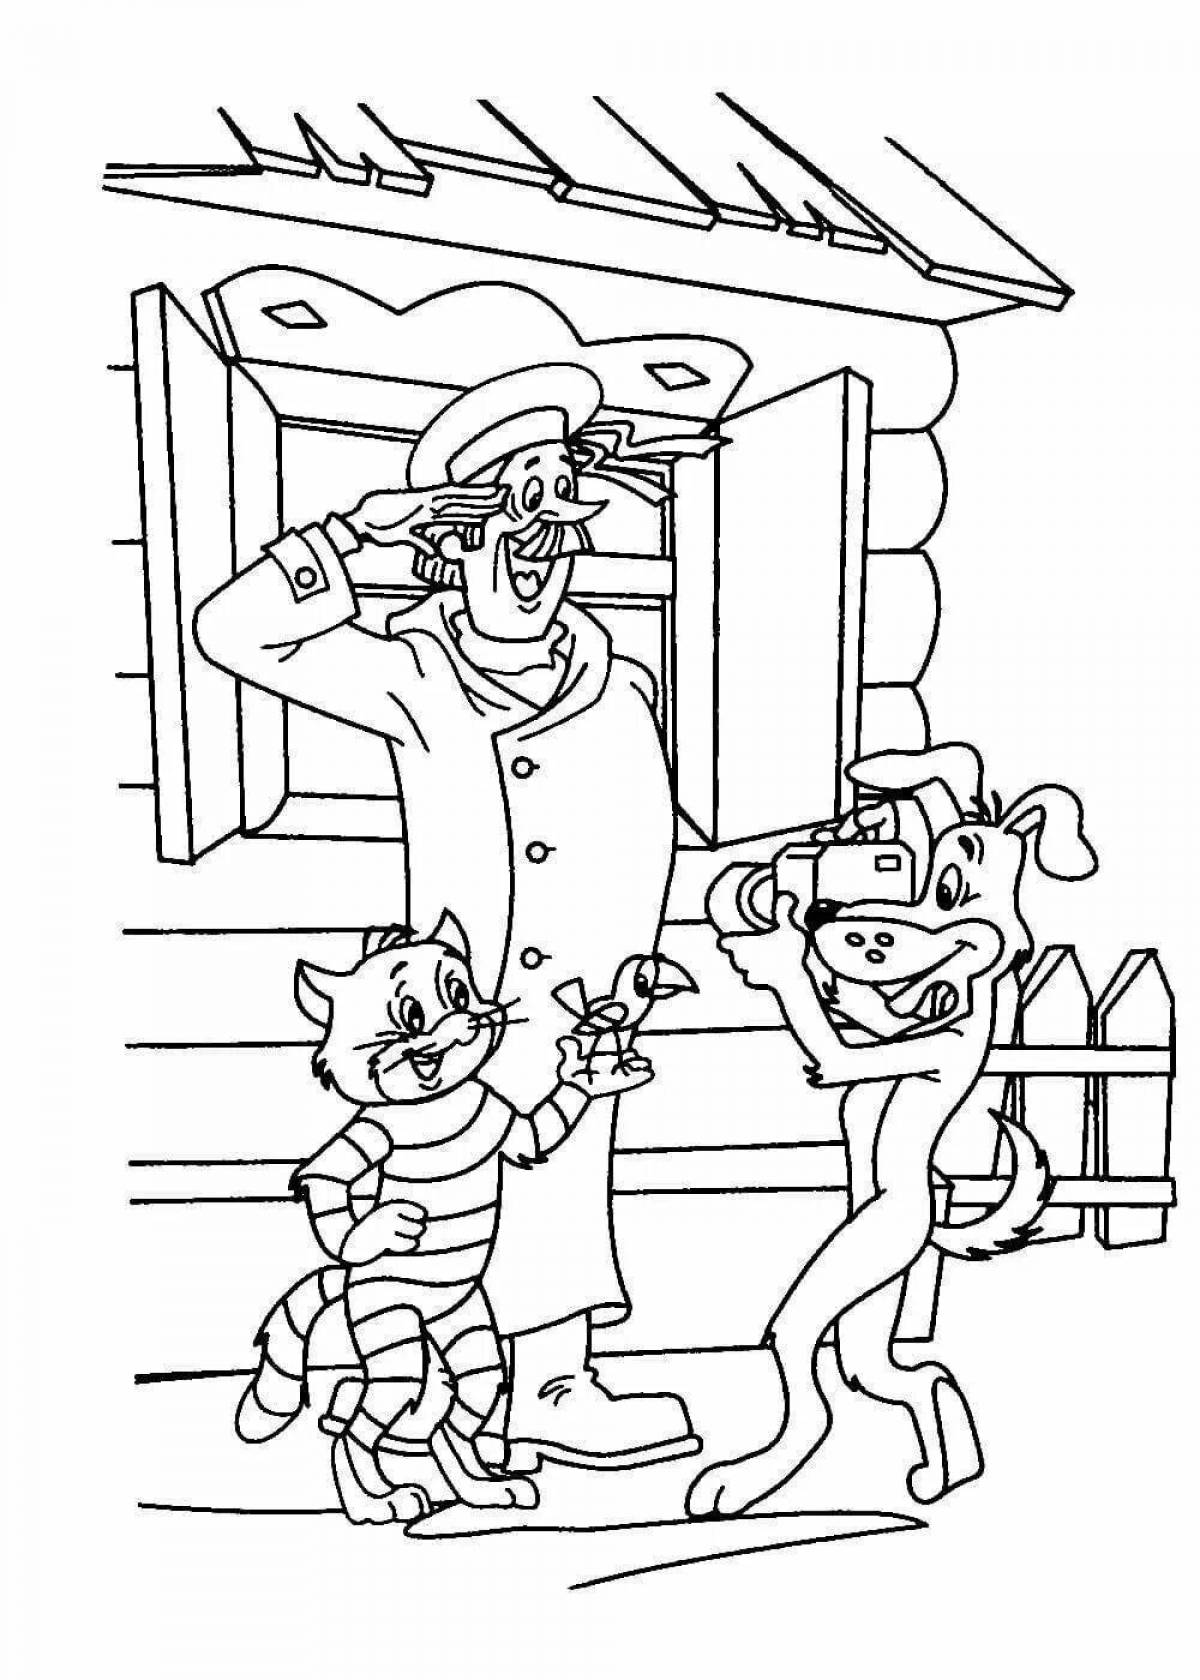 Dazzling marine coloring book for kids